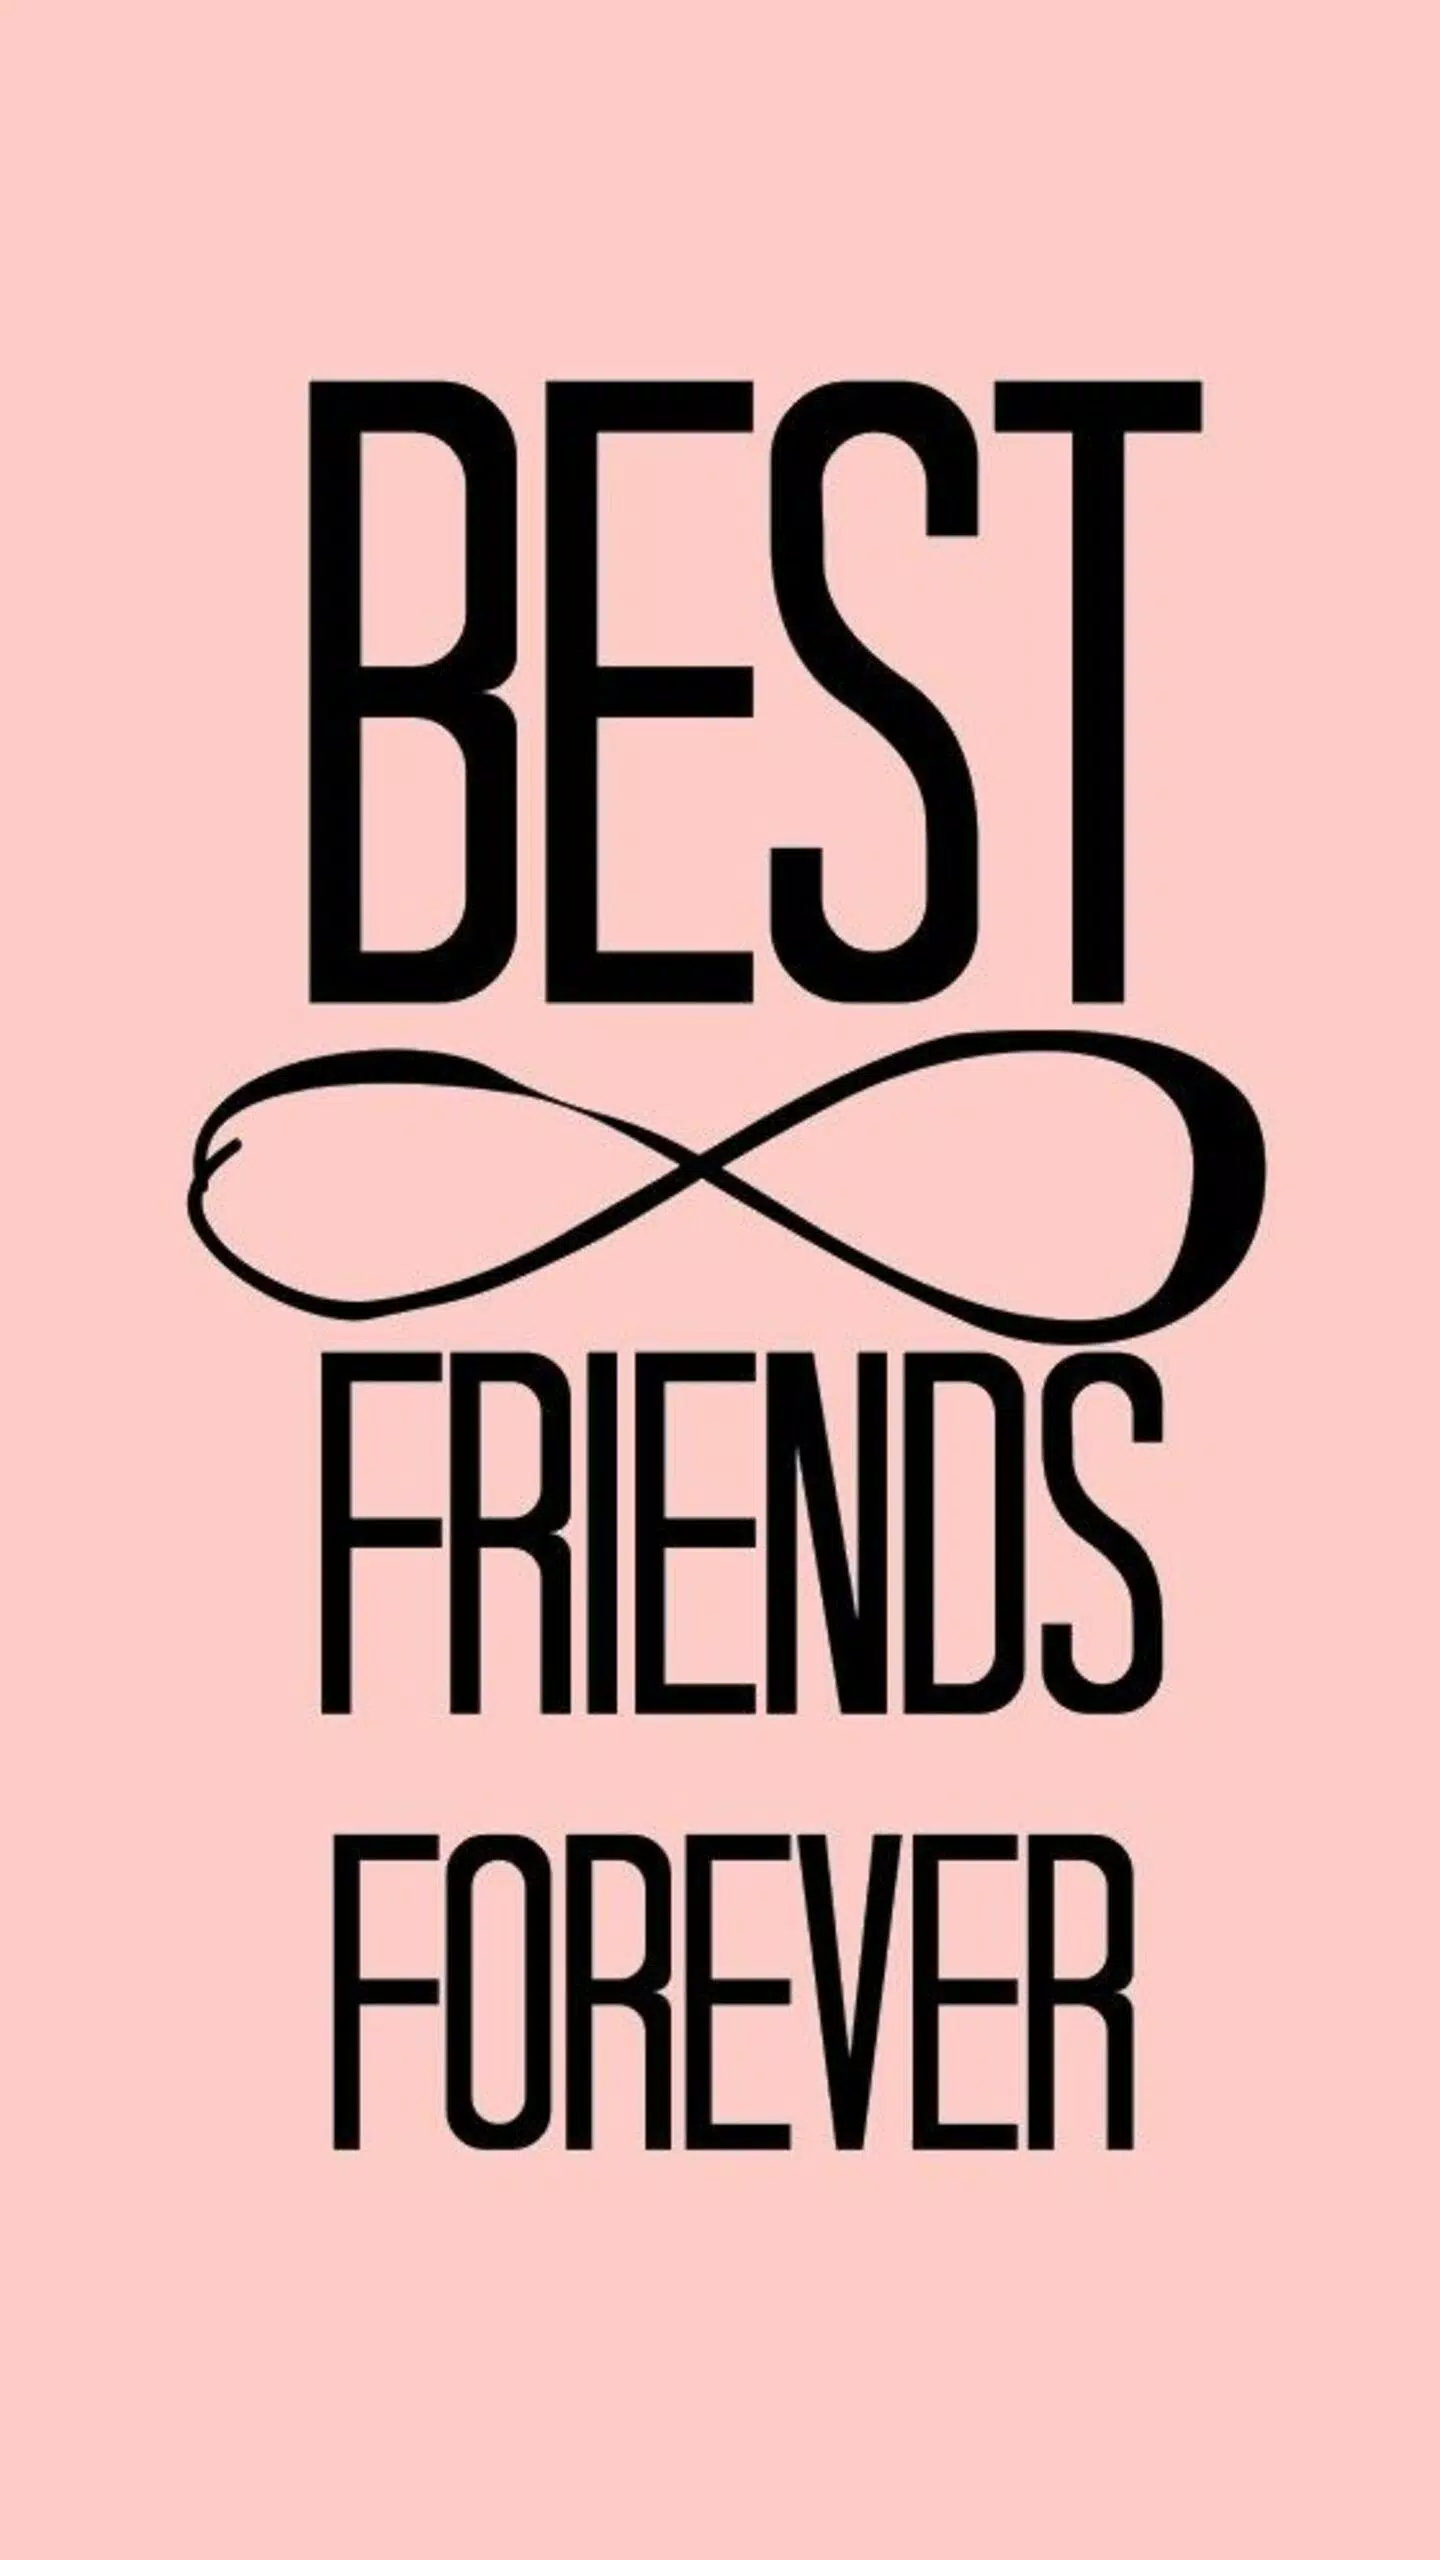 15 Cute Best Friends Forever Wallpapers : Two Best Friends - Idea Wallpapers  , iPhone Wallpapers,Color Schemes